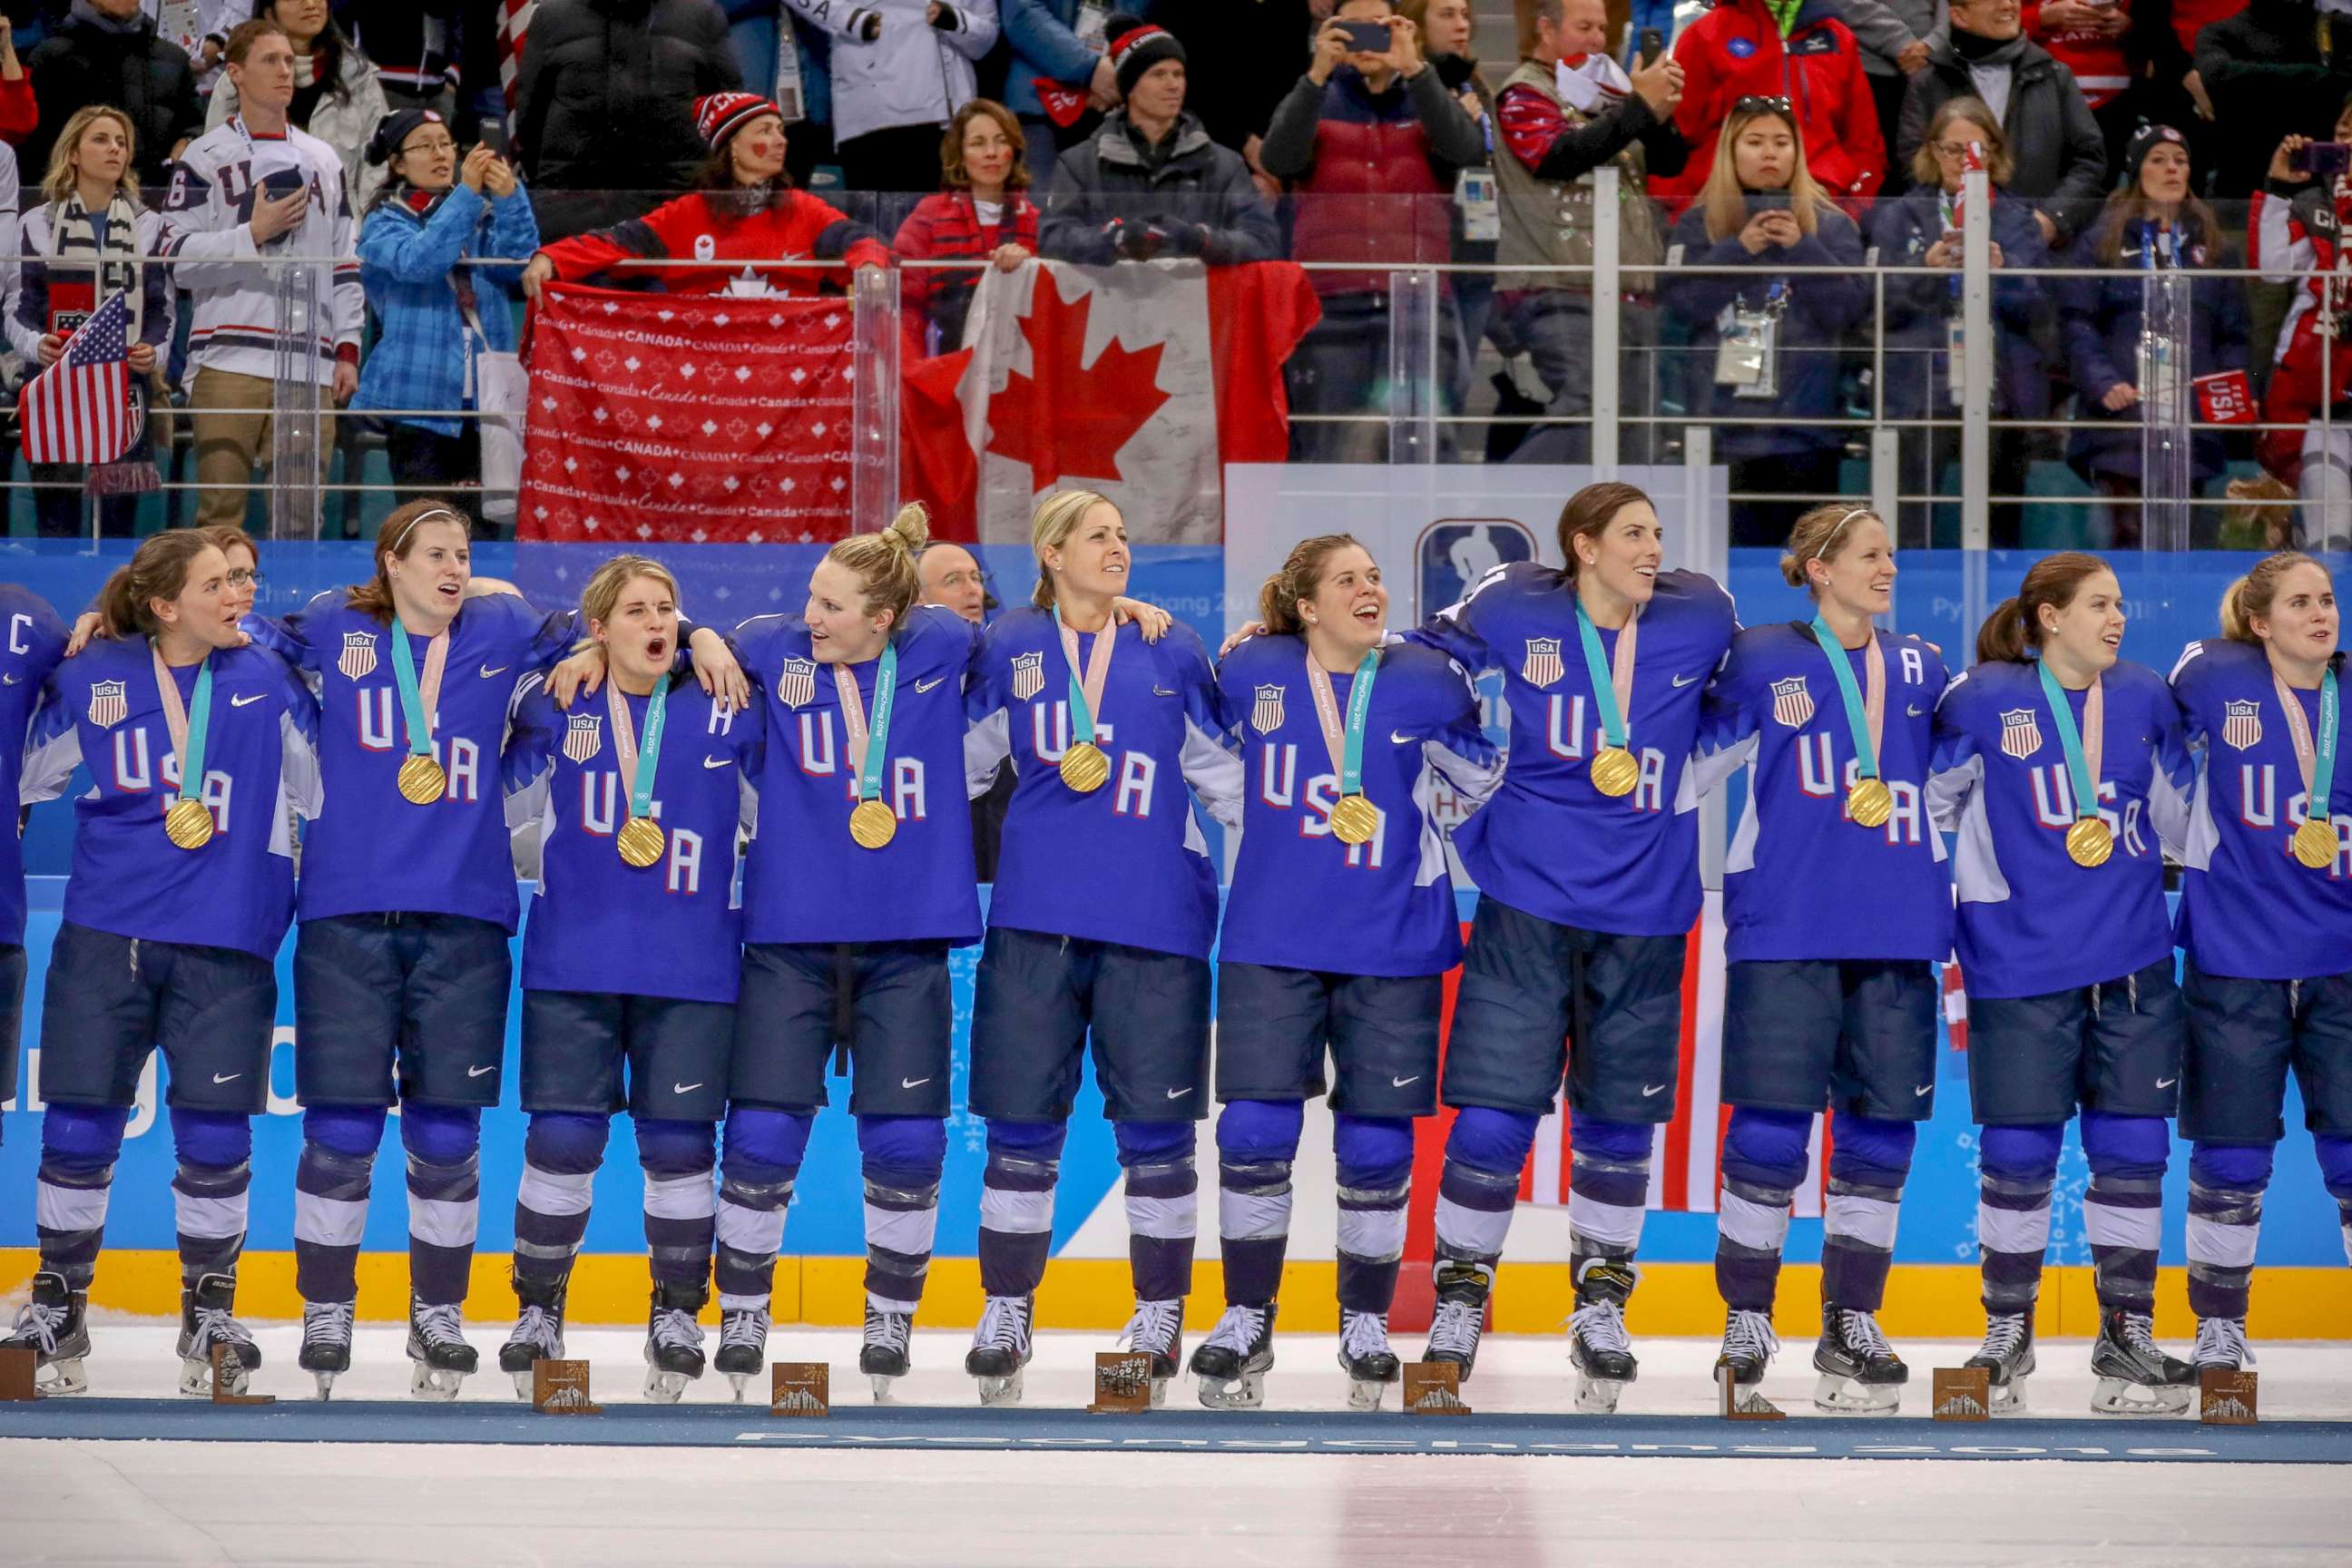 PHOTO: The members of the U.S. Women's hockey team, stand together with their gold medals around their necks, after they defeated the Canadian team in a shootout, Feb. 22, 2018.